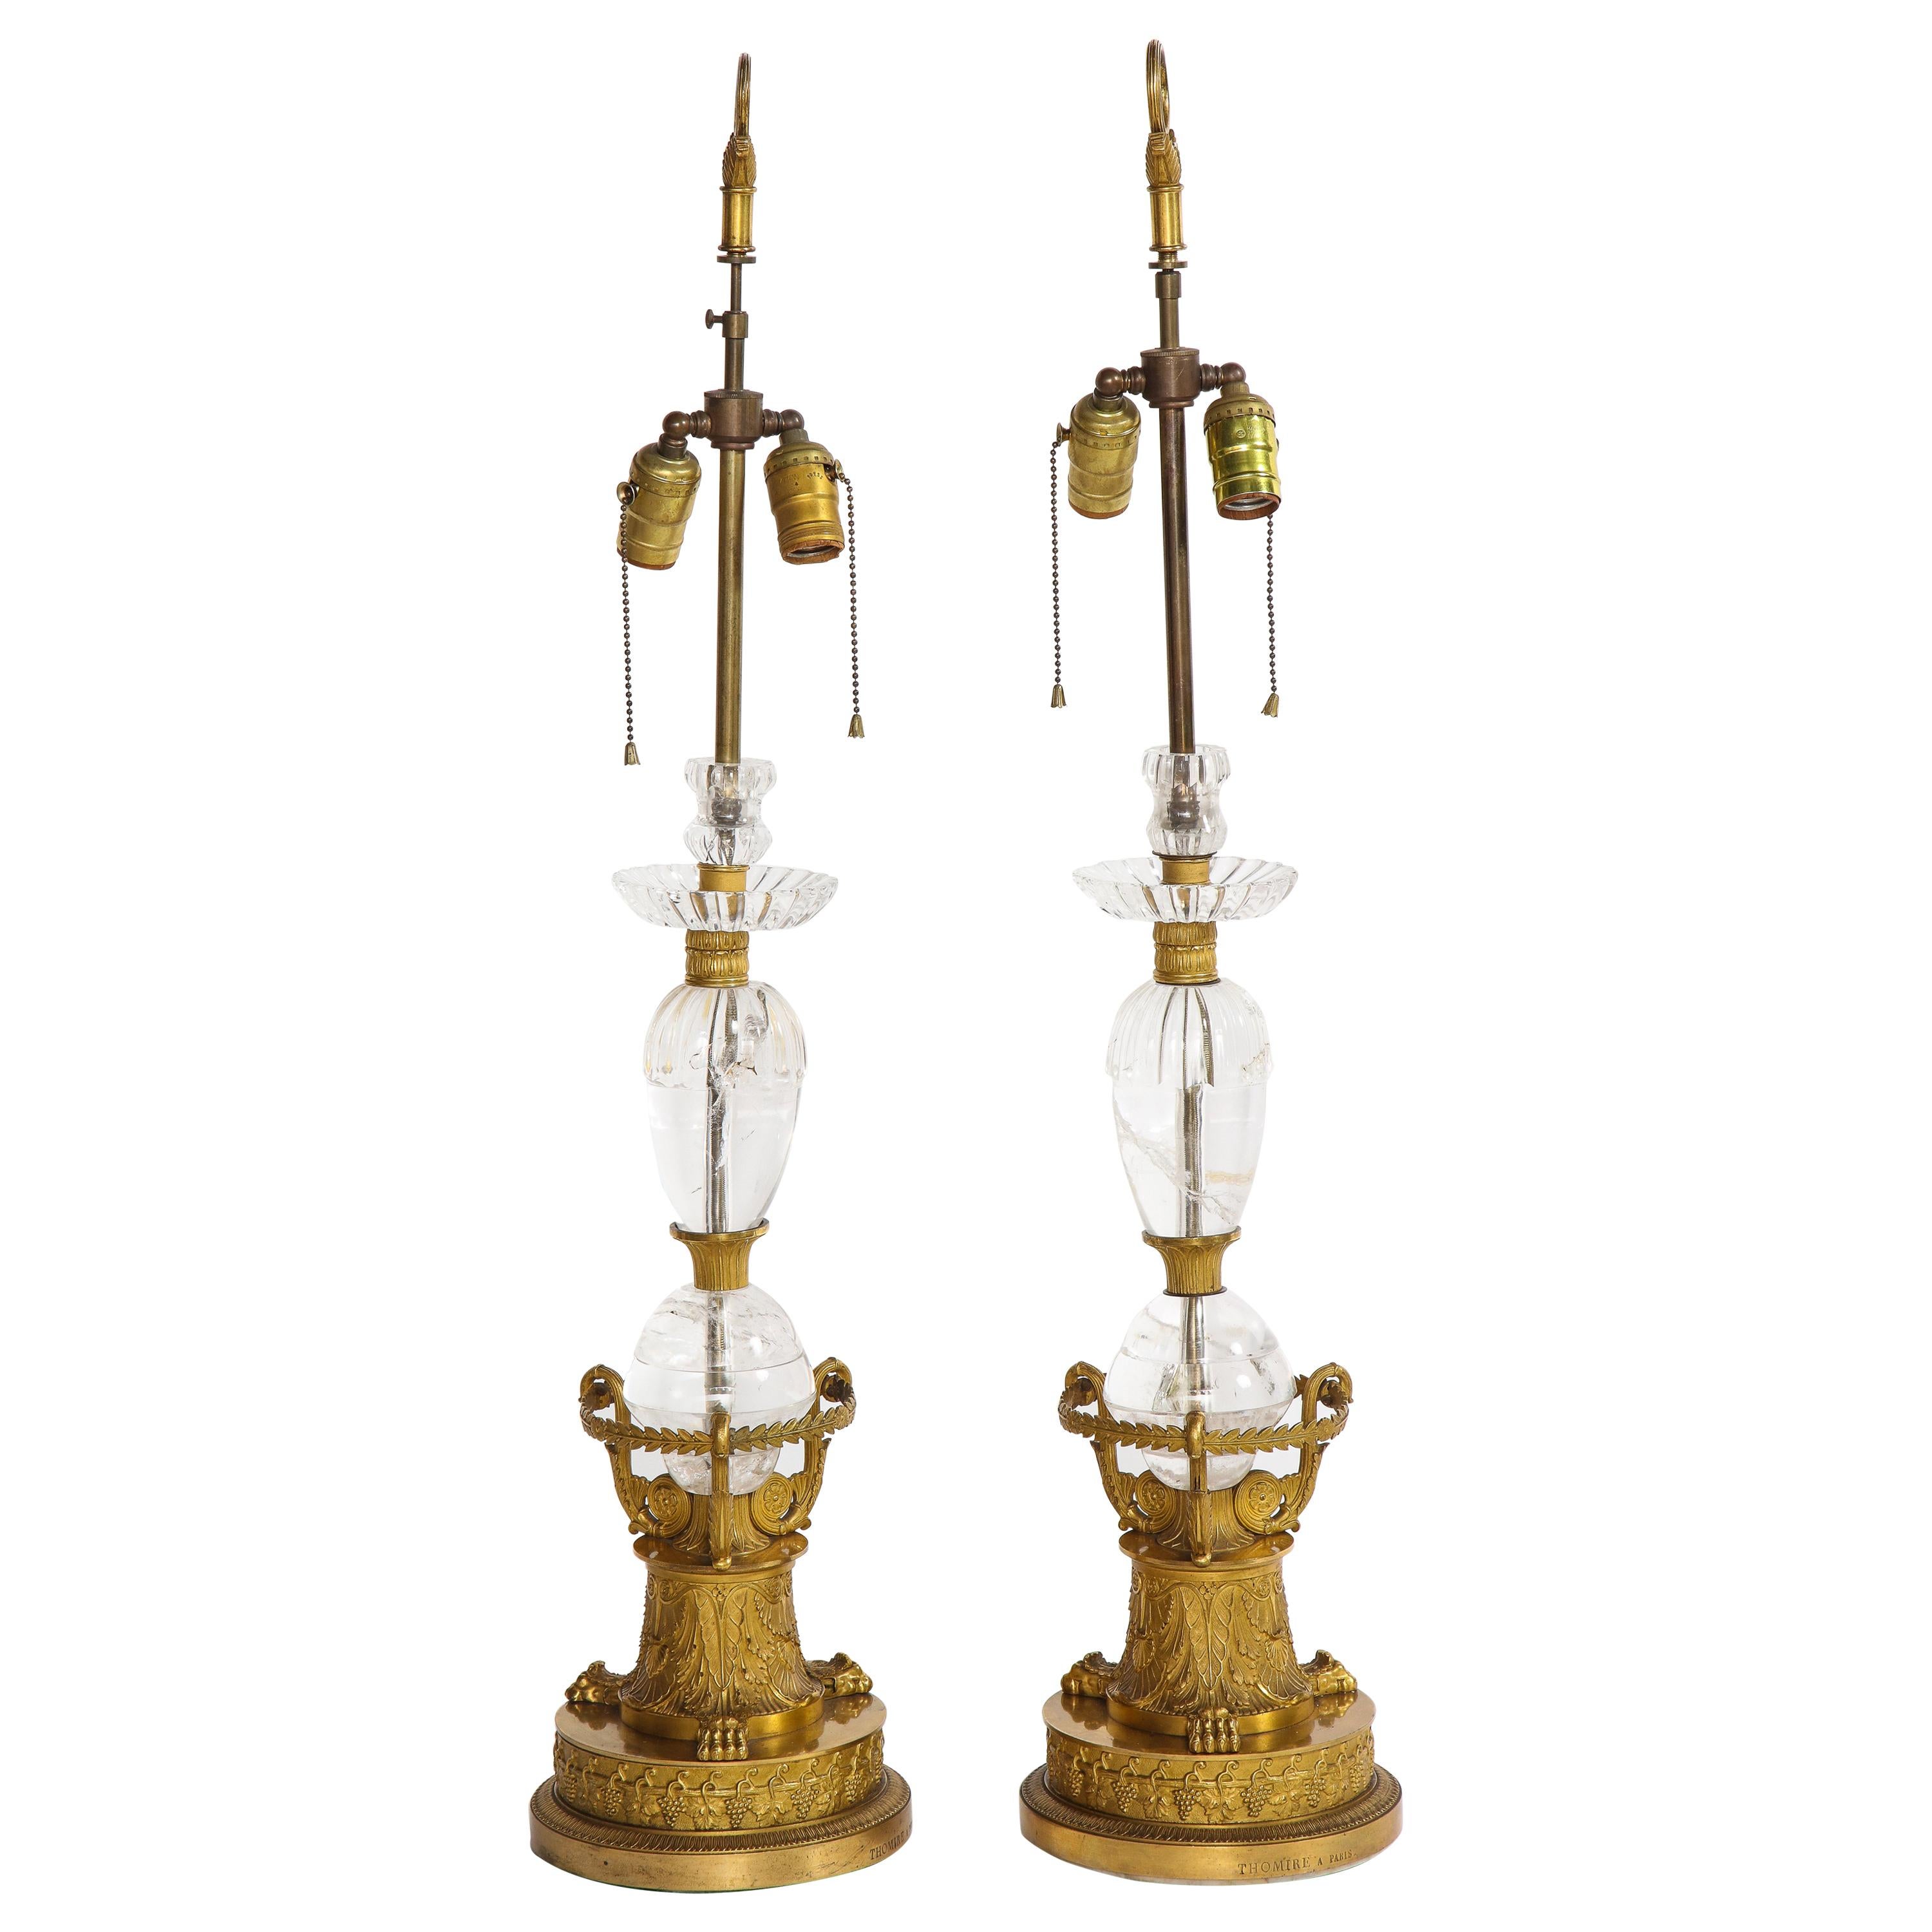 Pair of Empire Gilt Bronze and Rock Crystal Table Lamps by Thomire à Paris